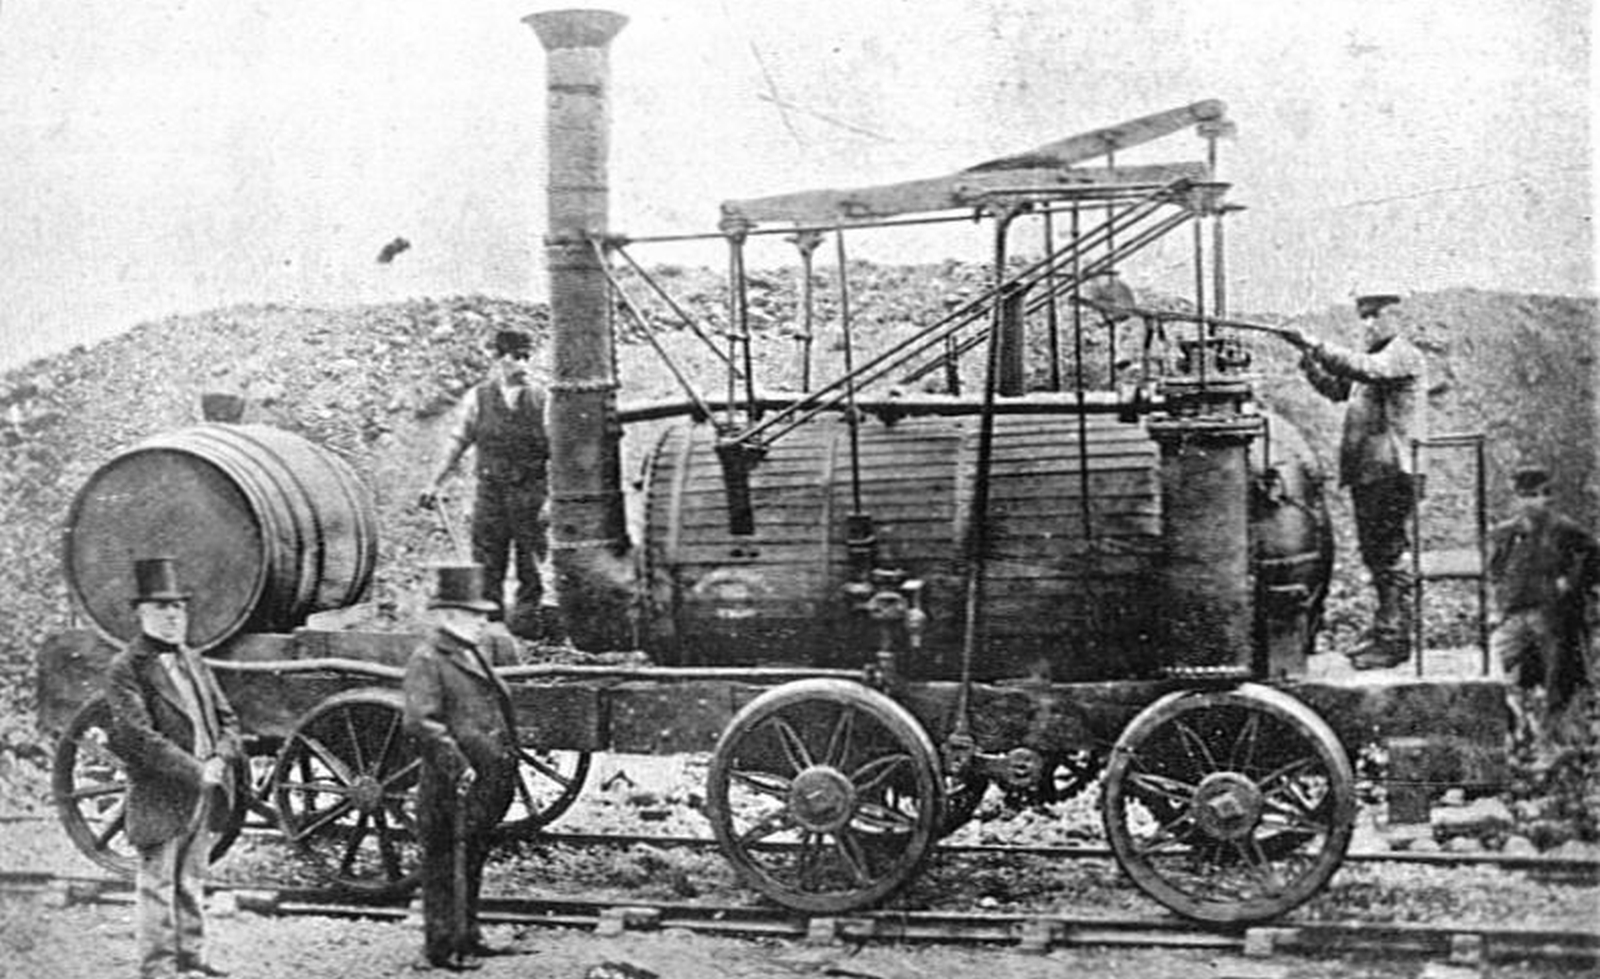 “Puffing Billy” or “Wylam Dilly” (unclear)